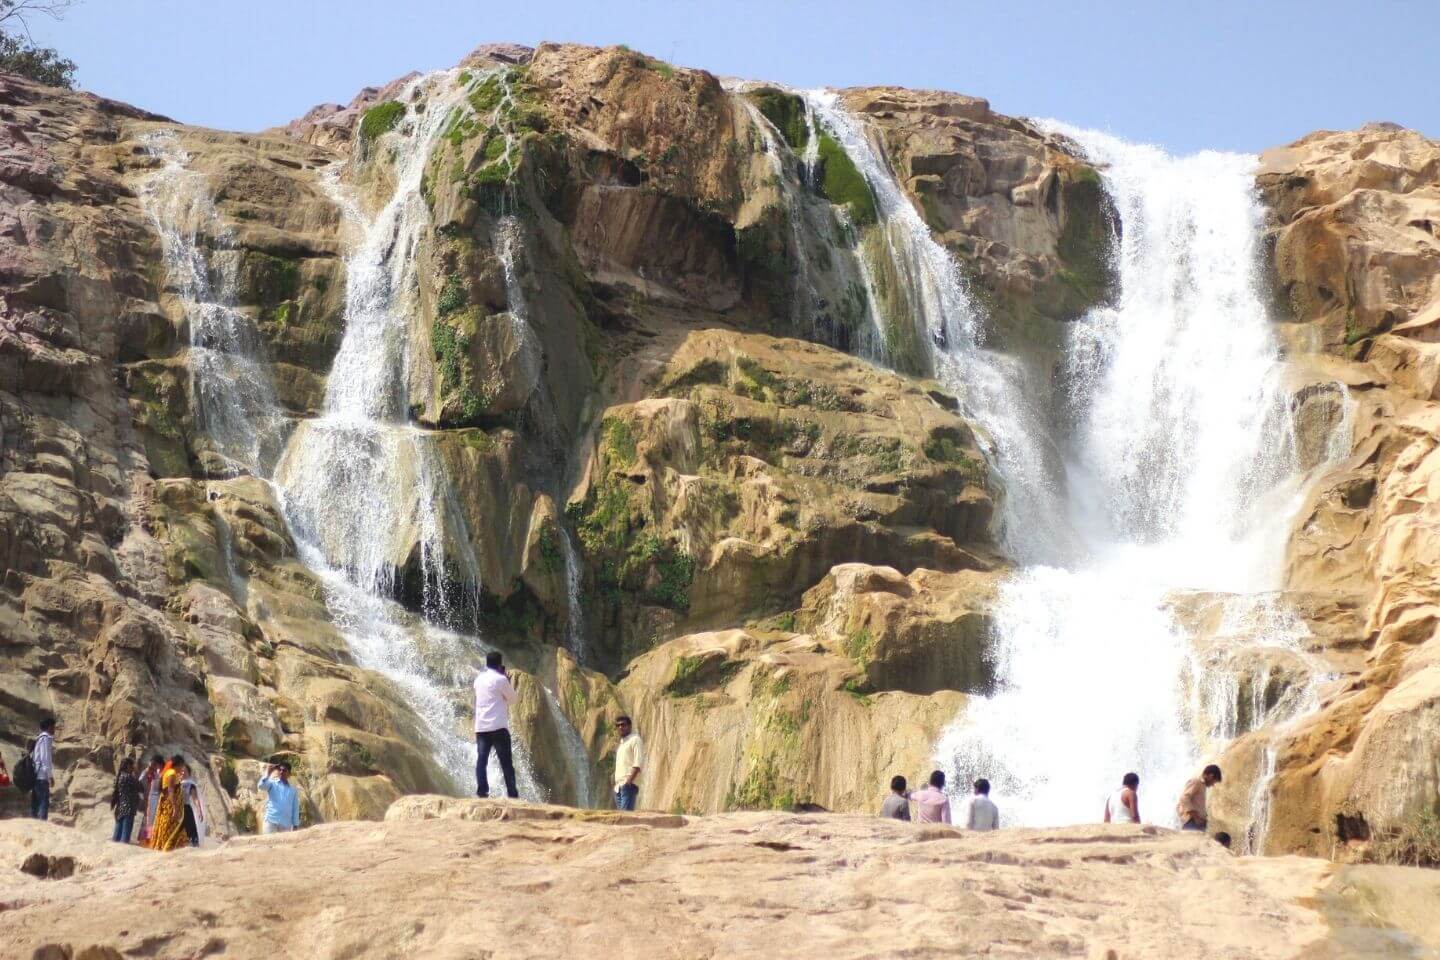 Kuntala Waterfalls Top Place to visit near hyderabad with friends and family within 300 km